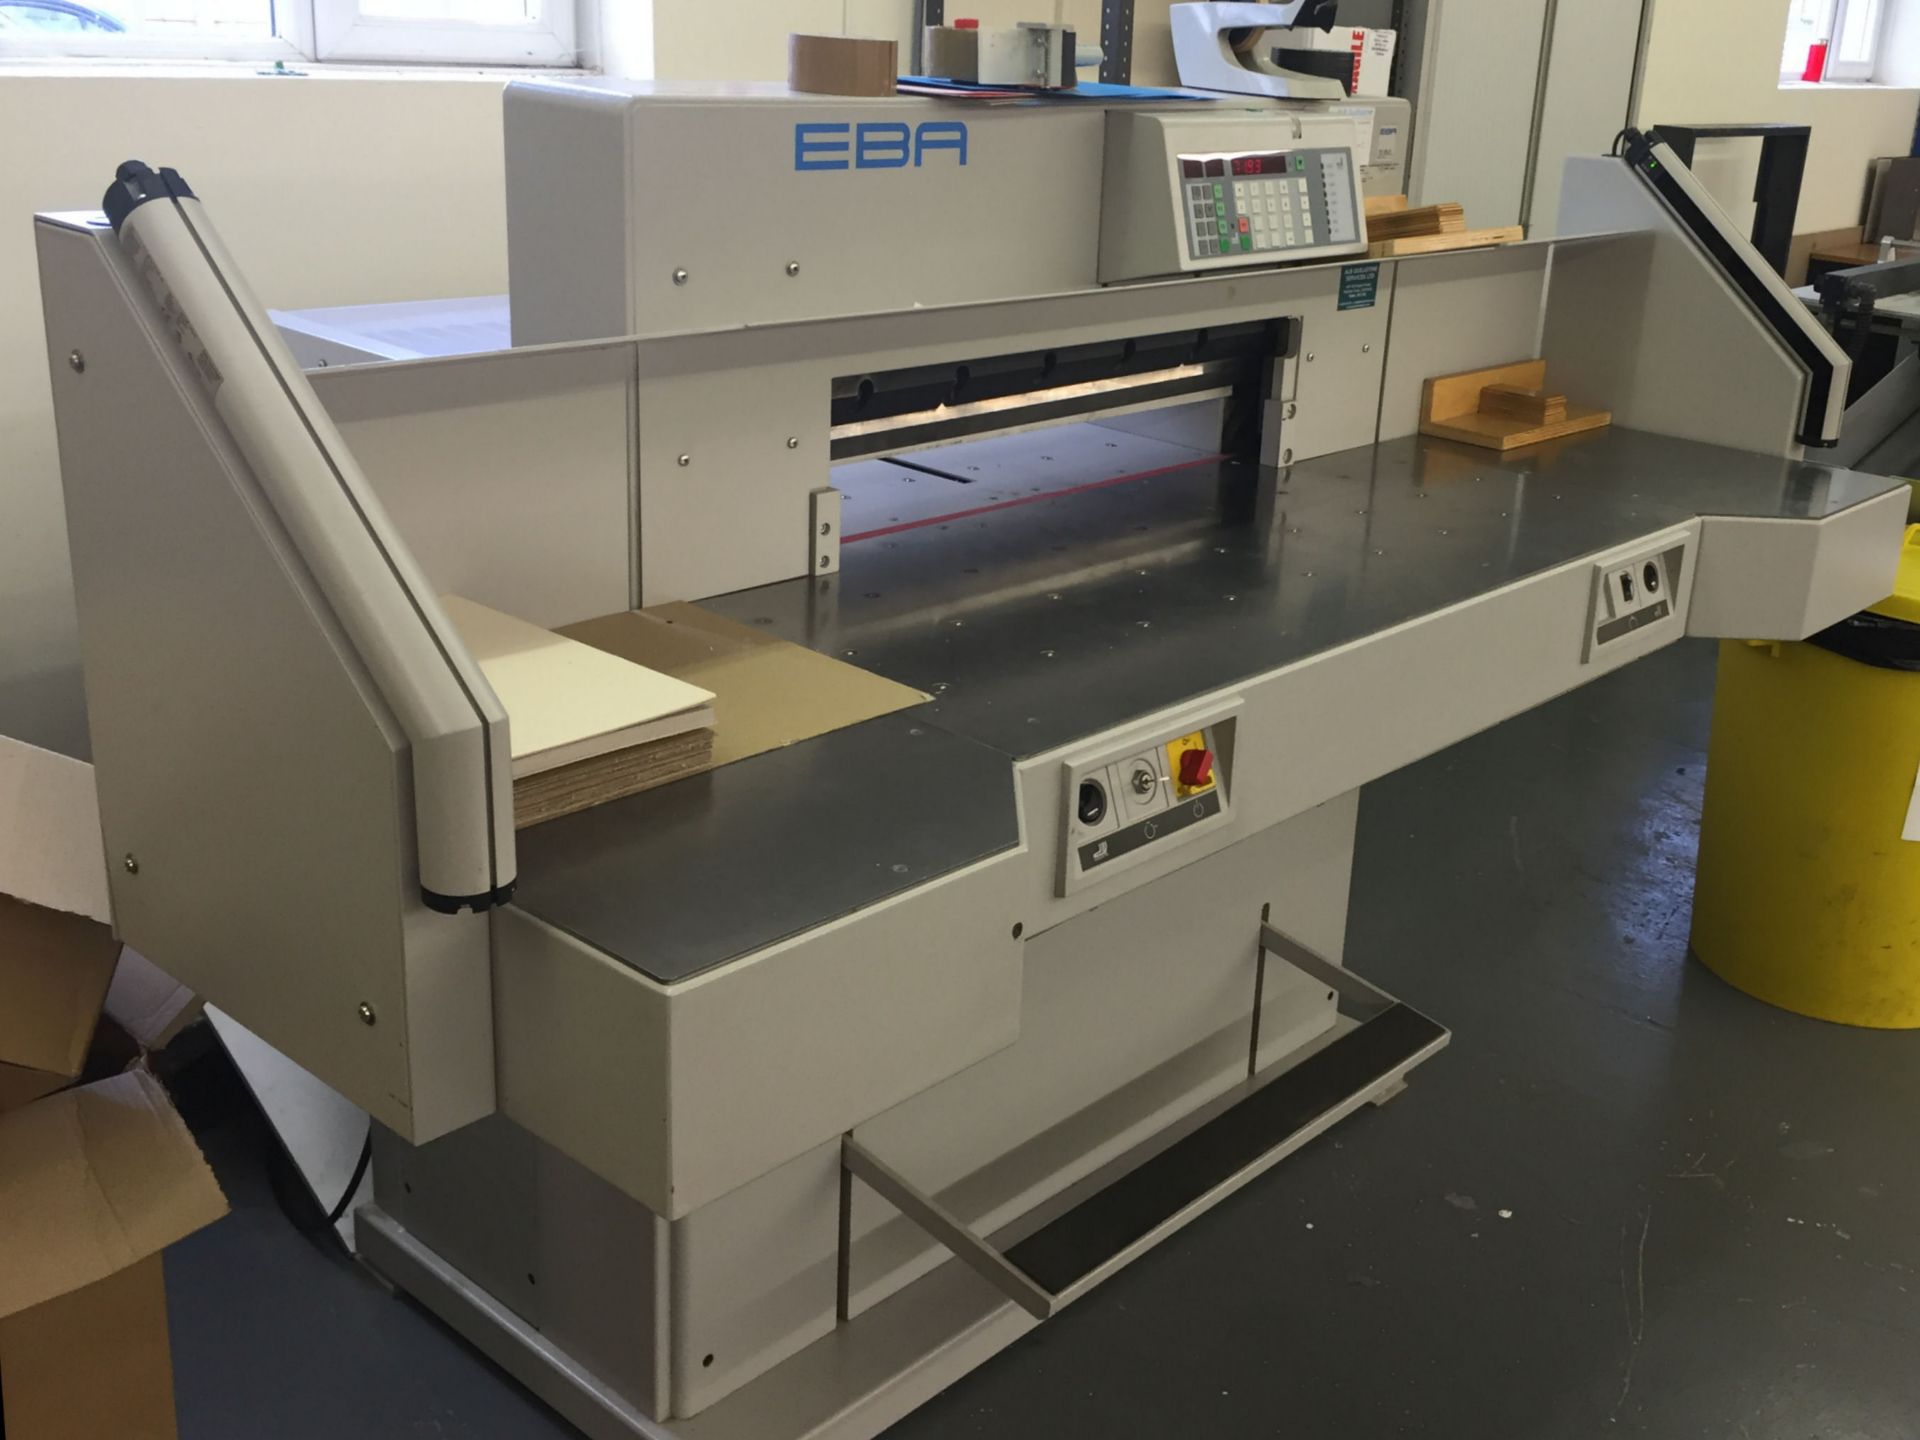 1 x EBA Professional Guillotine 721-06LT - CL171 - Location: London, N4 - Image 2 of 11